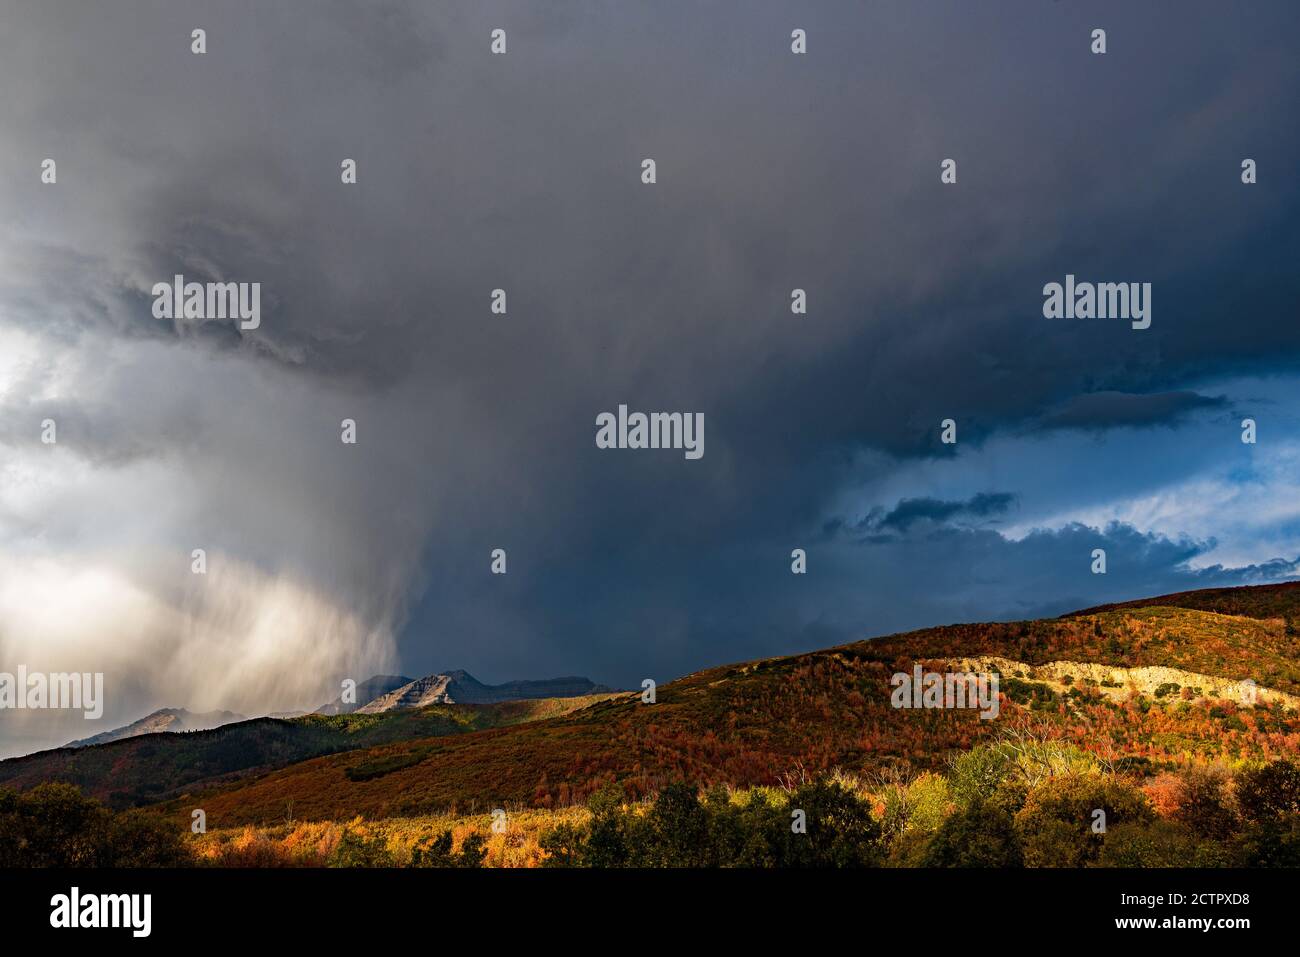 Thunderstorm in the mountains.  Quick and sometimes violent thunderstorms can develop over the high mountains of Utah, USA in the Fall. Stock Photo